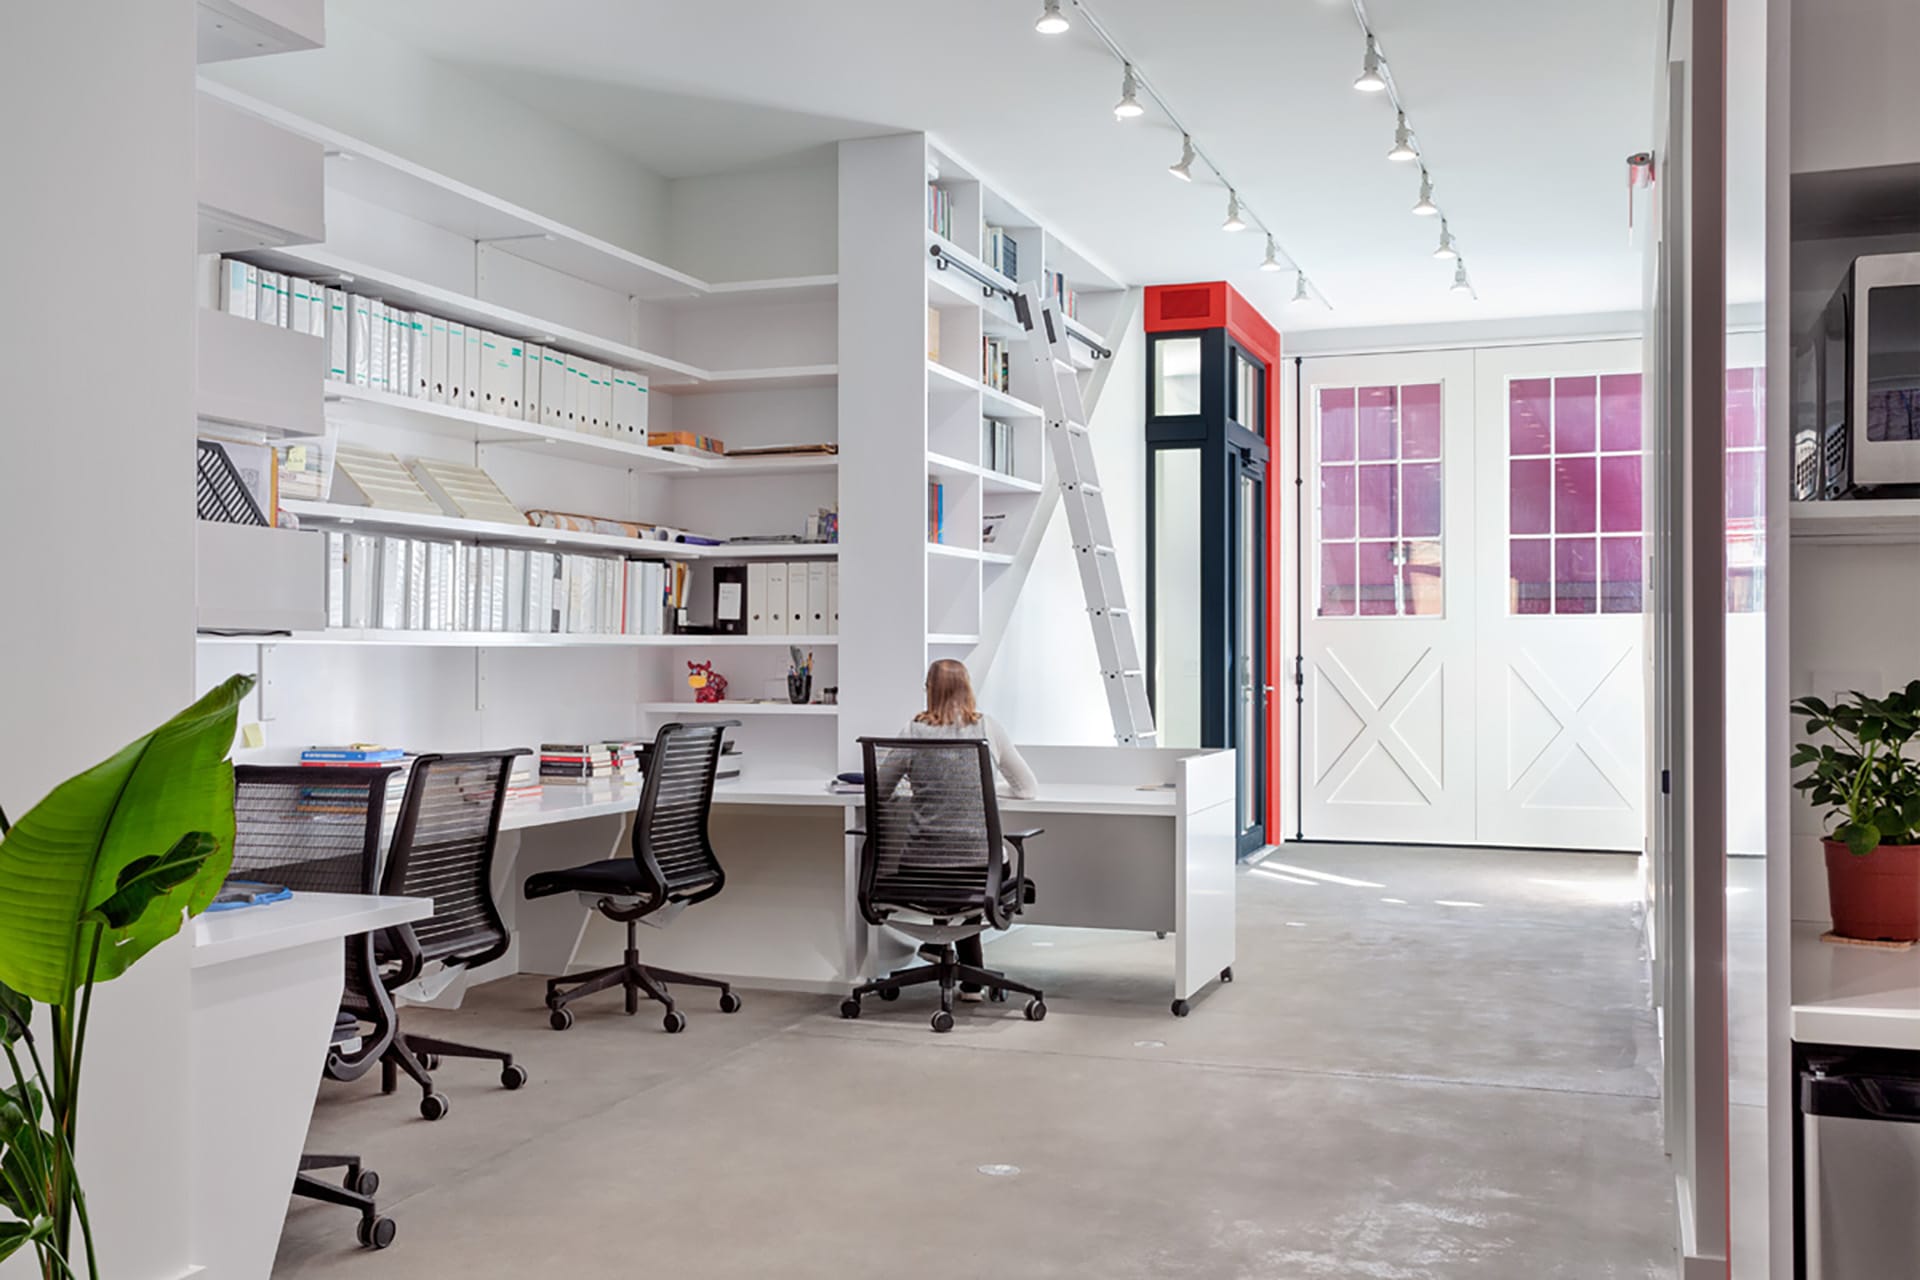 All-white office space of the Asia Art Archives with cement floors and red-and-black entry door